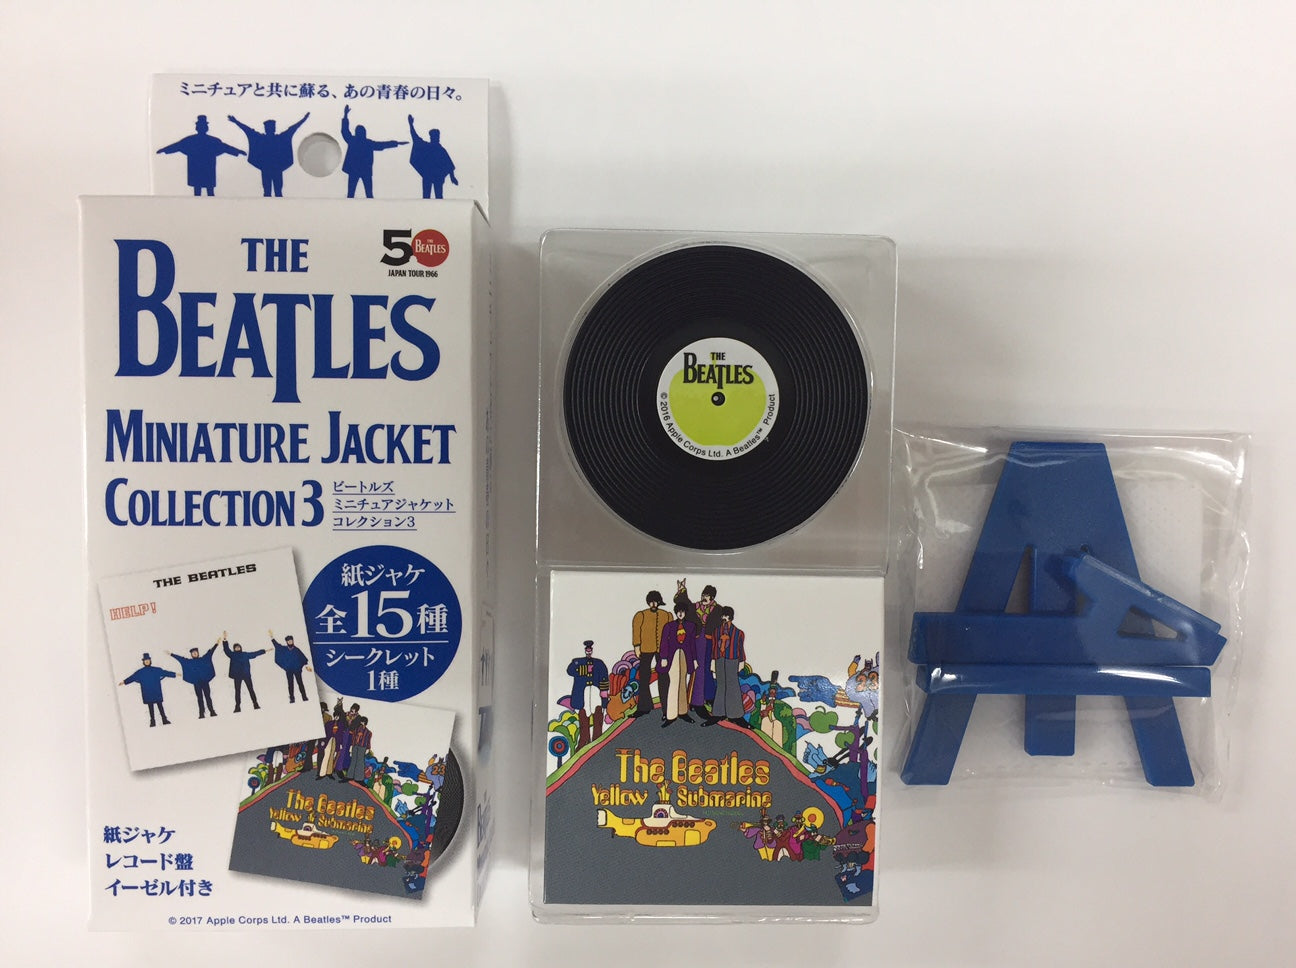 THE BEATLES Vol.3 Miniature Jacket Collection